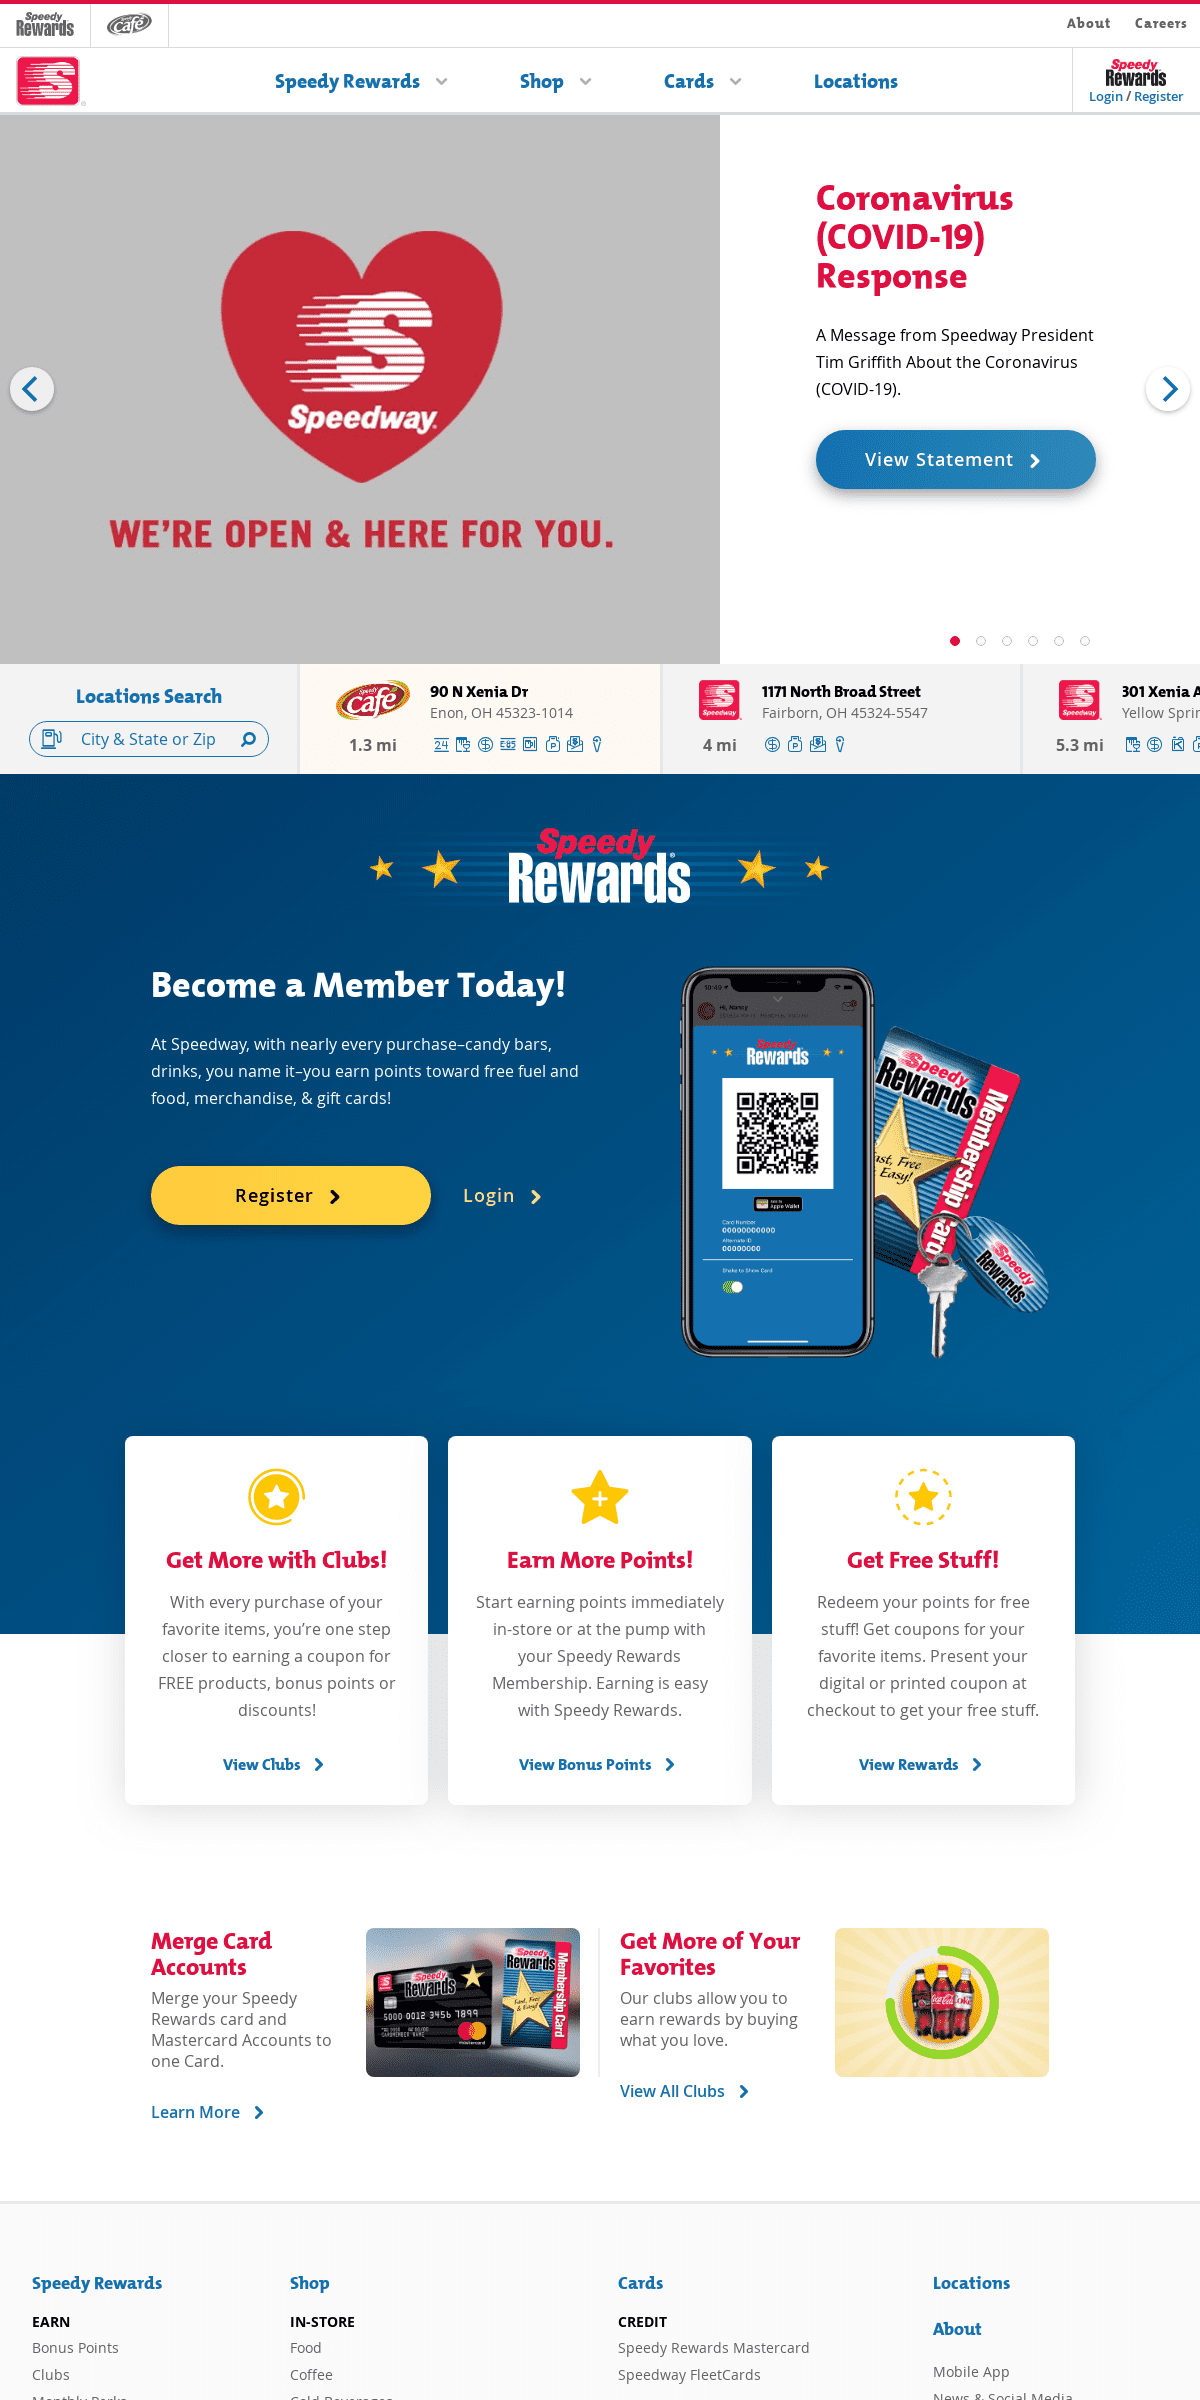 A complete backup of speedway.com